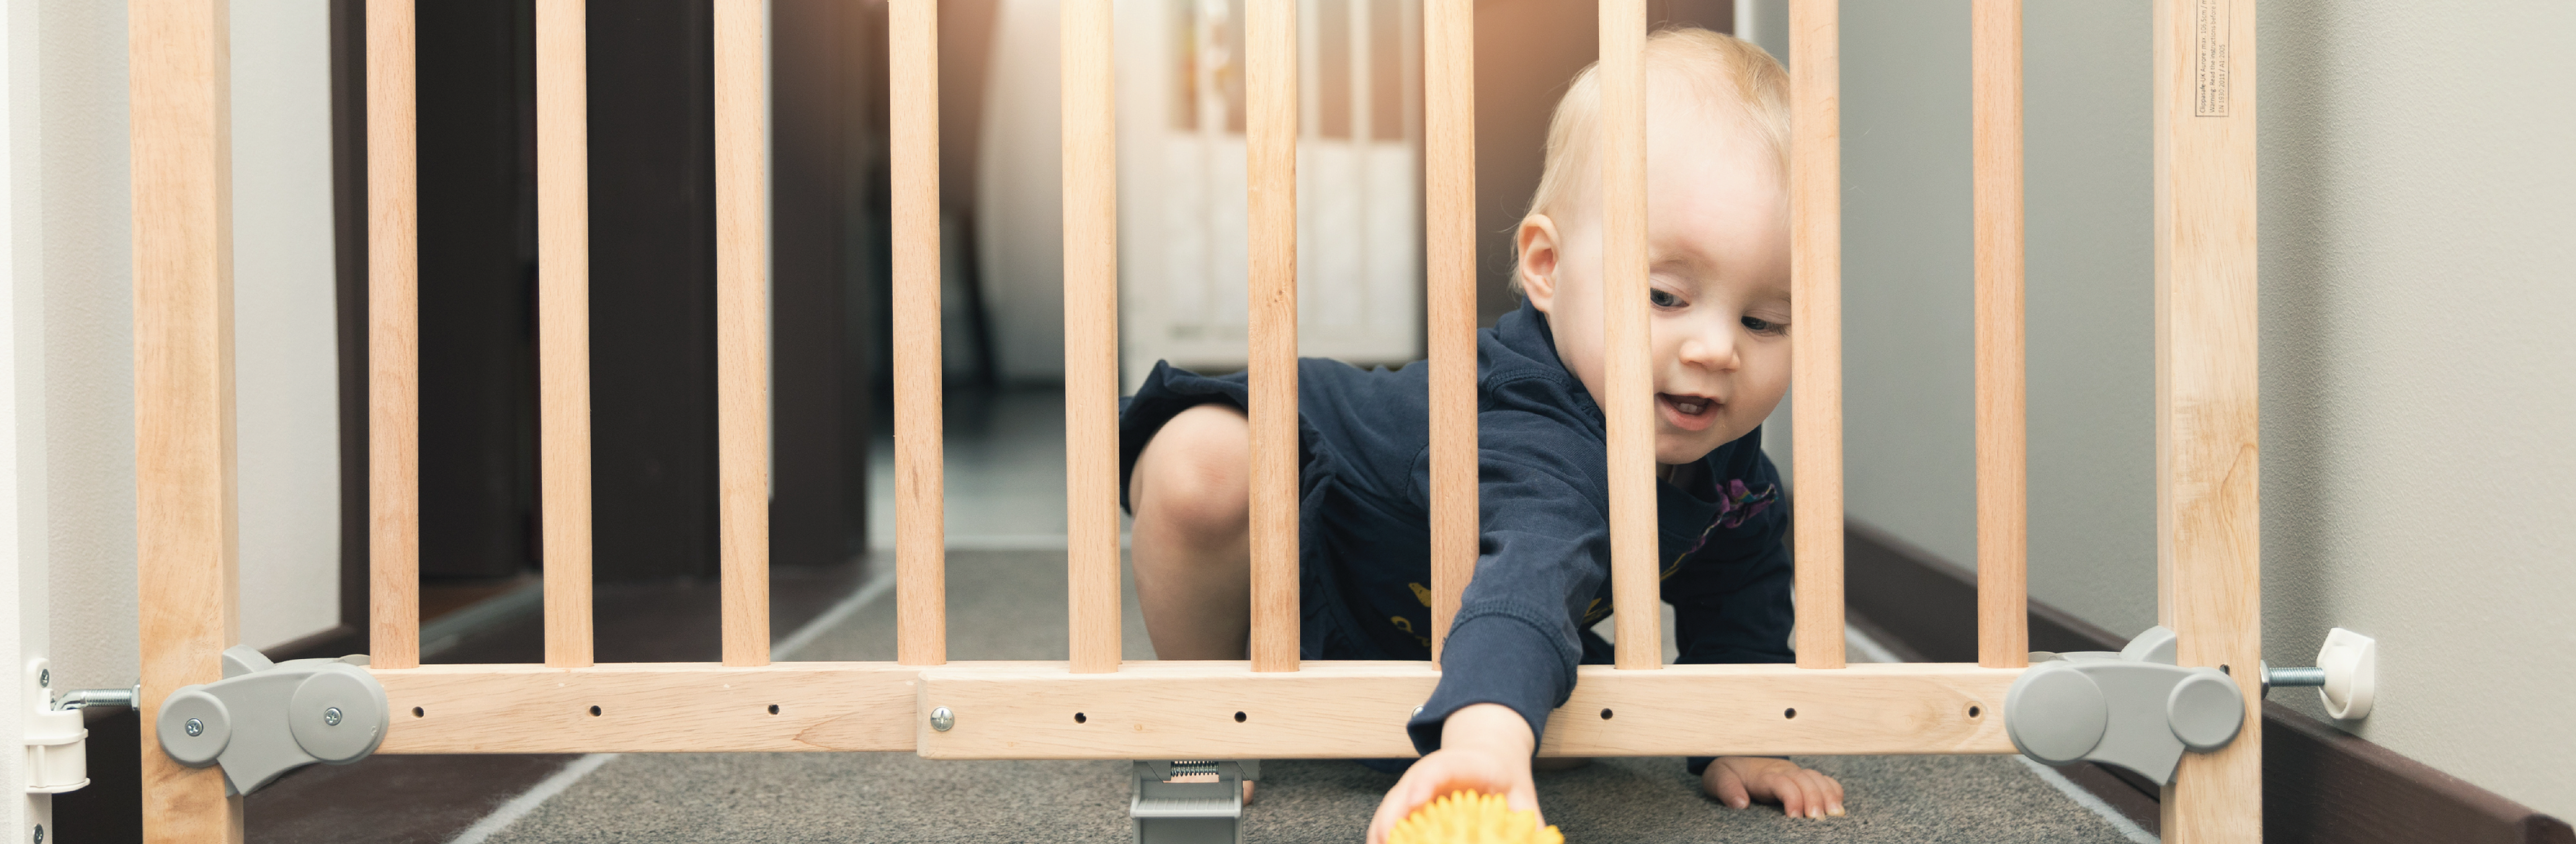 toddler reaching through baby gate at the top of stairs